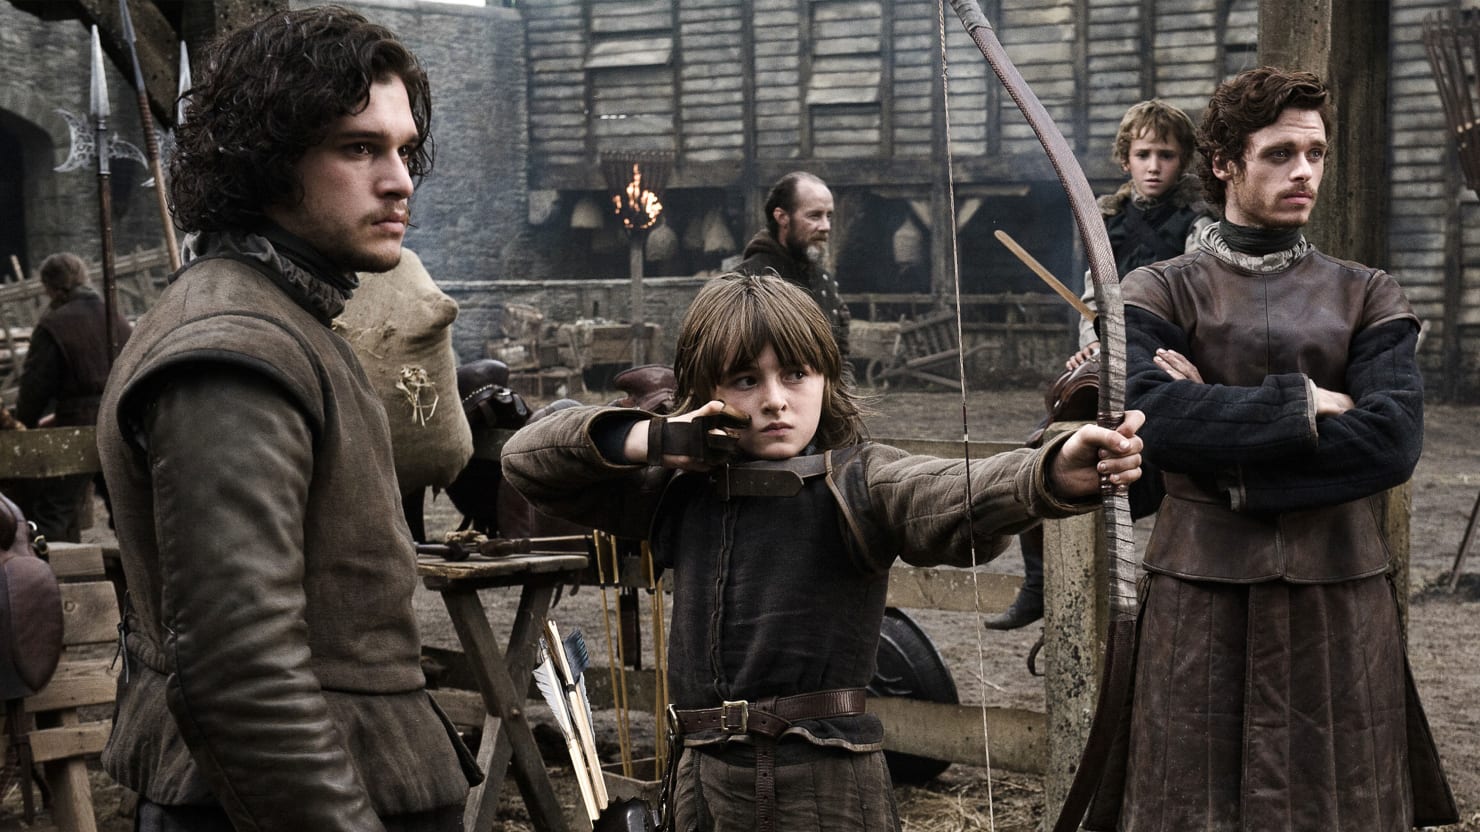 Revisiting the Games of Thrones Pilot 10 Years Later